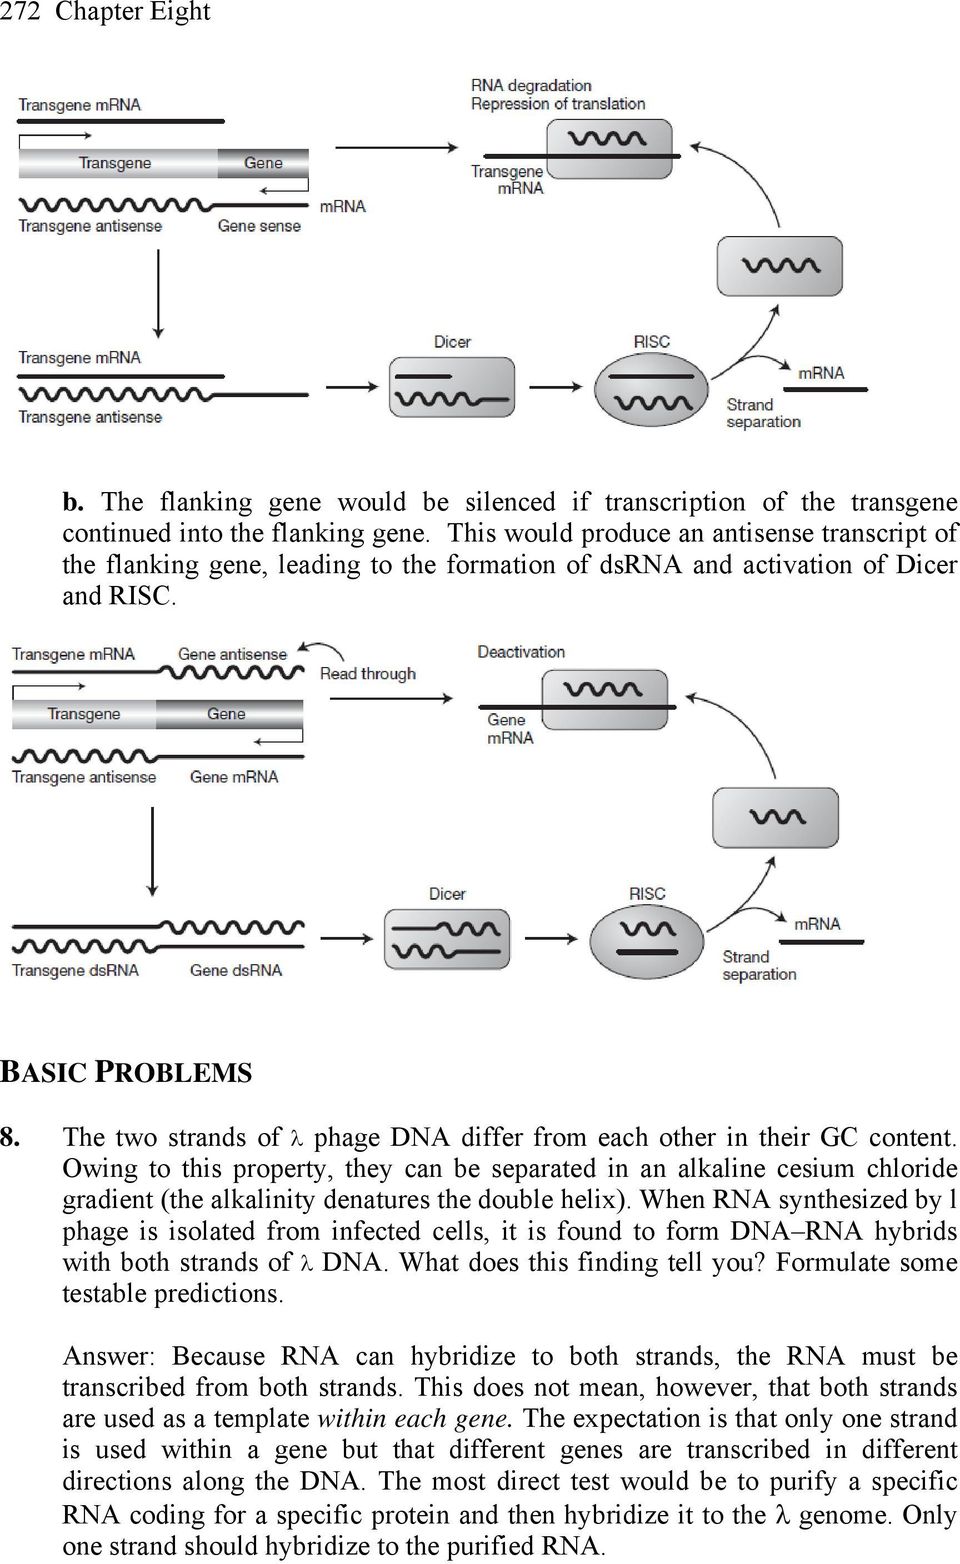 The two strands of phage DNA differ from each other in their GC content.